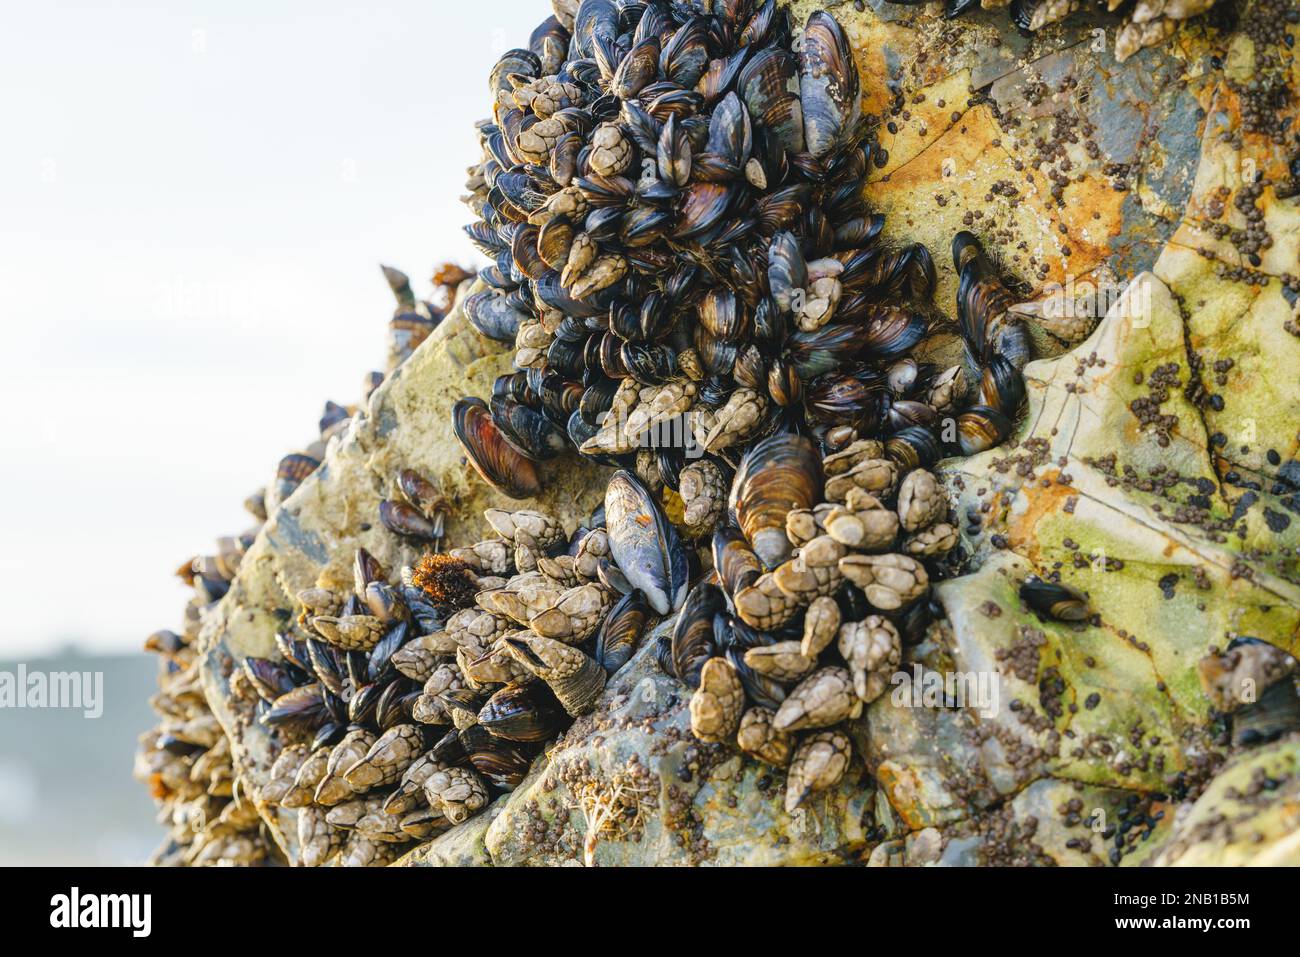 Goose barnacles, or stalked barnacles or gooseneck barnacles, are filter-feeding crustaceans attached to rocks at Avila Beach, California Stock Photo